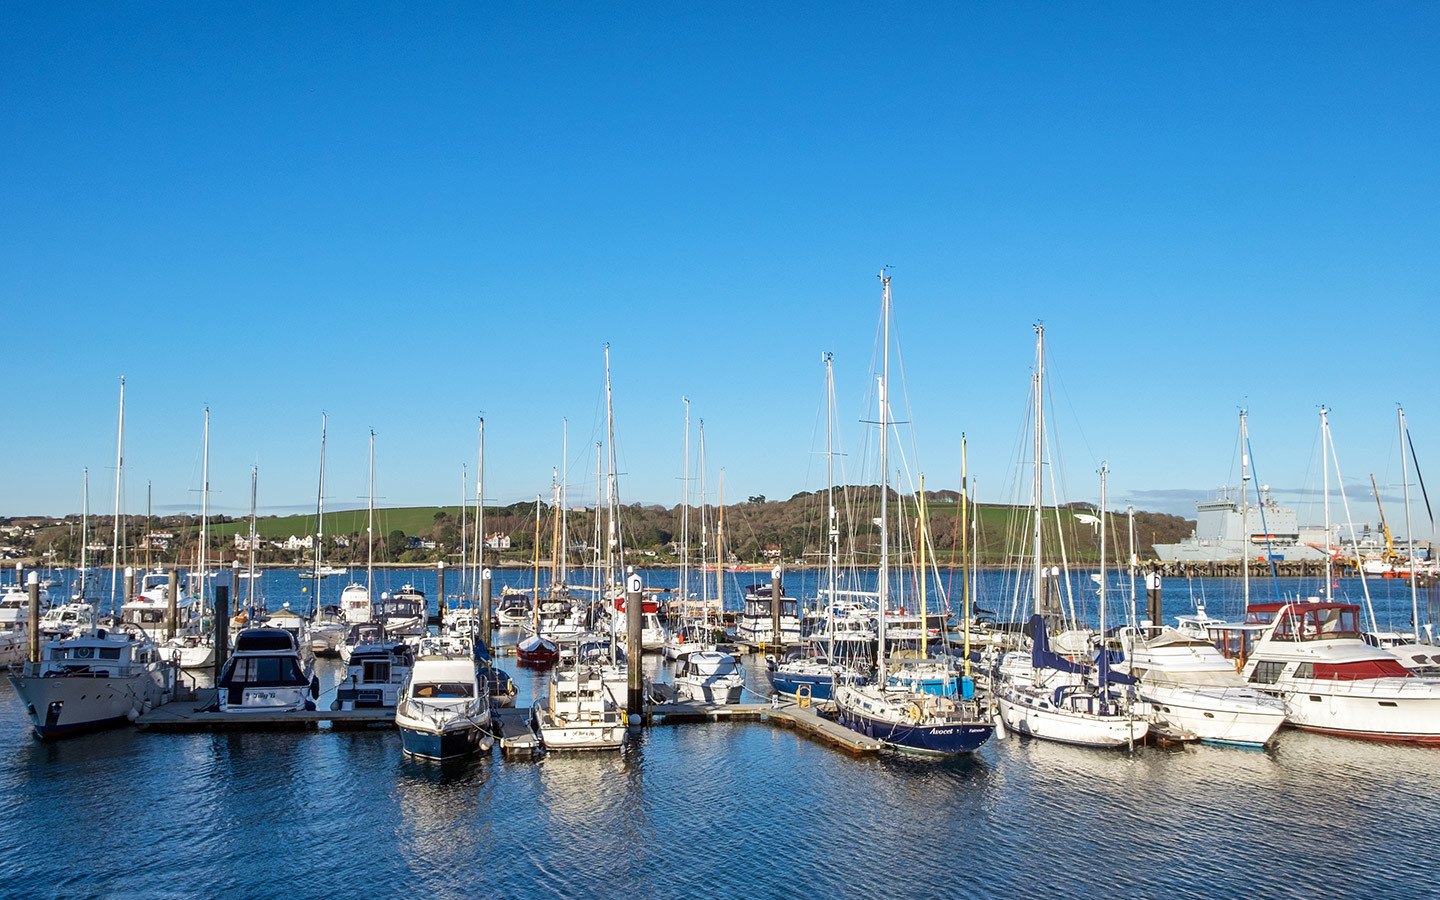 Falmouth Harbour in Cornwall